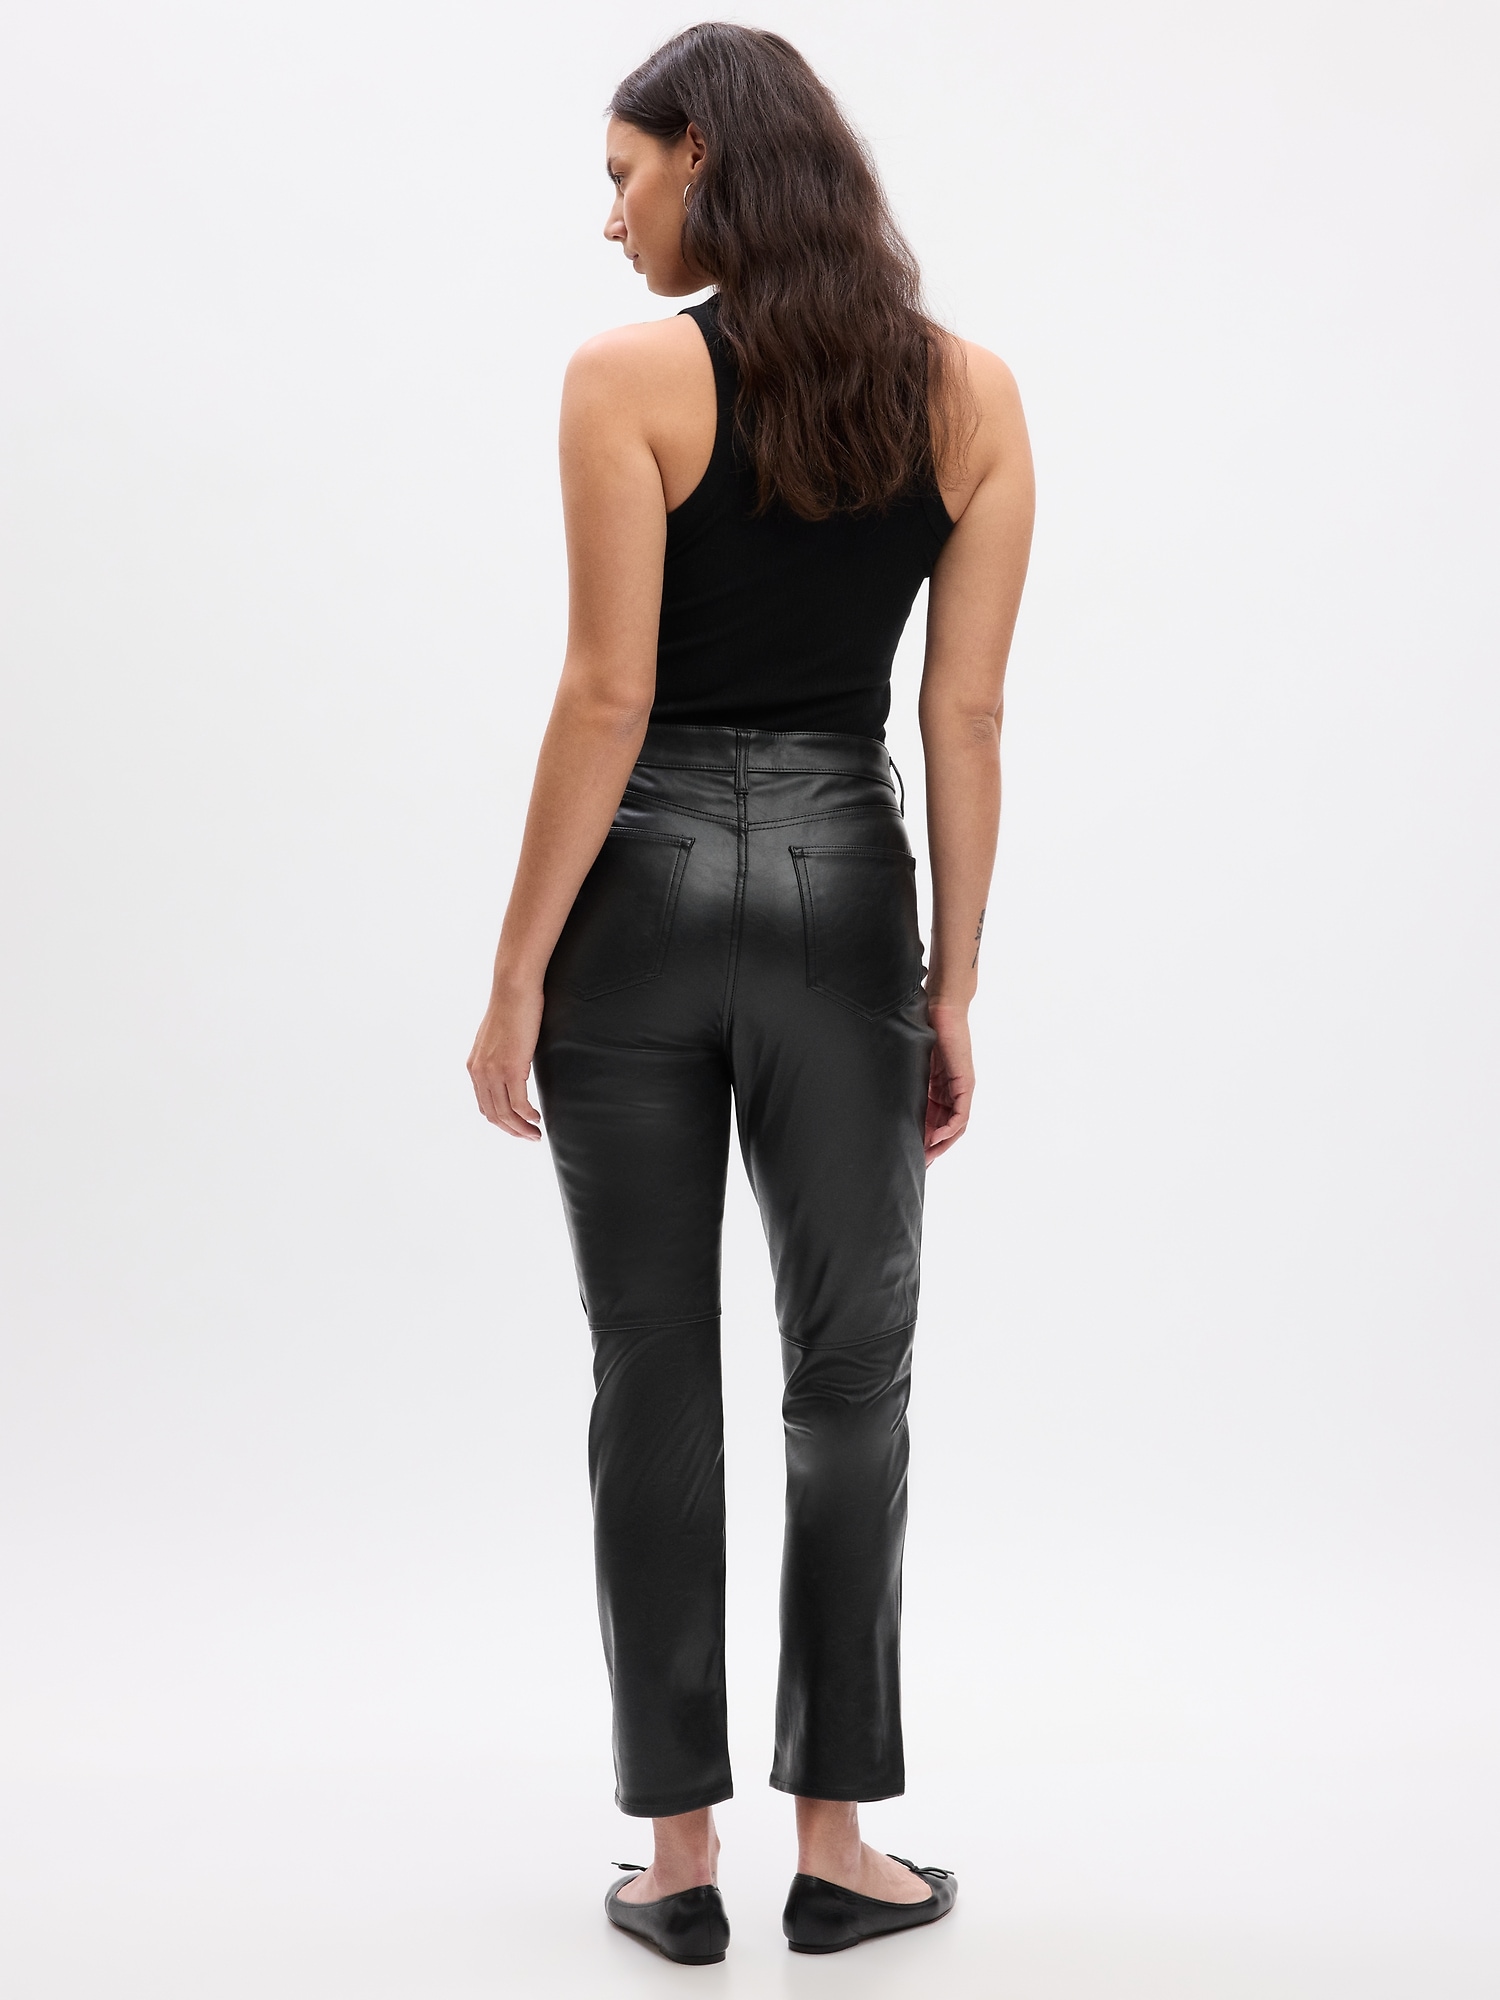 JDEFEG Petite Leather Pants for Women Womens High Waisted Slim